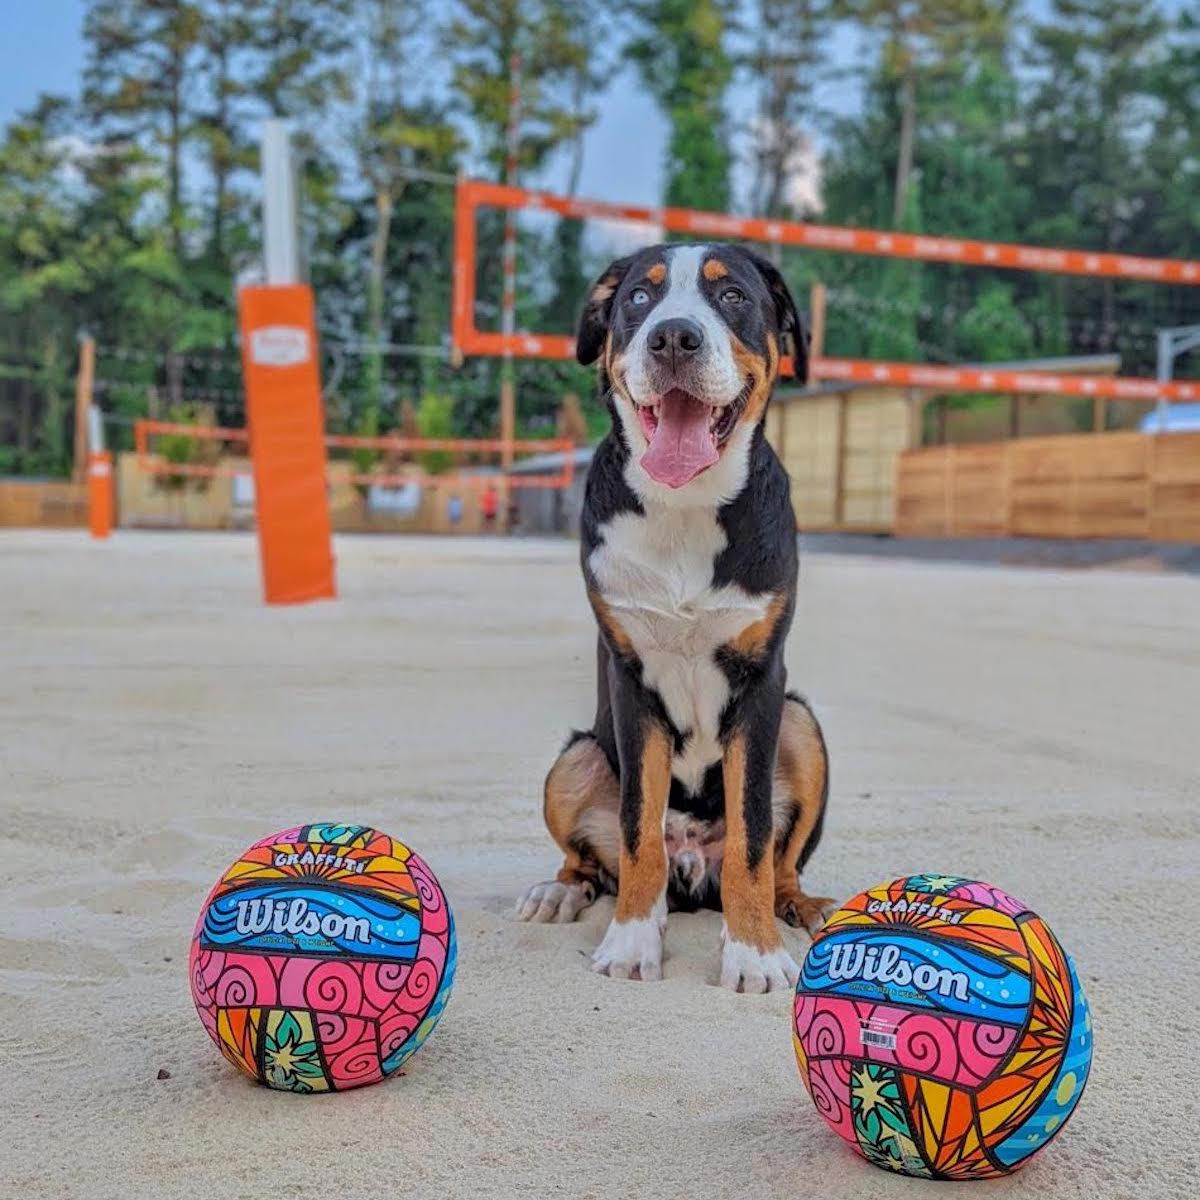 Fetch Park Debuts in Alpharetta With Volleyball Courts -- An Addition Not Seen at Its Other Parks - 1